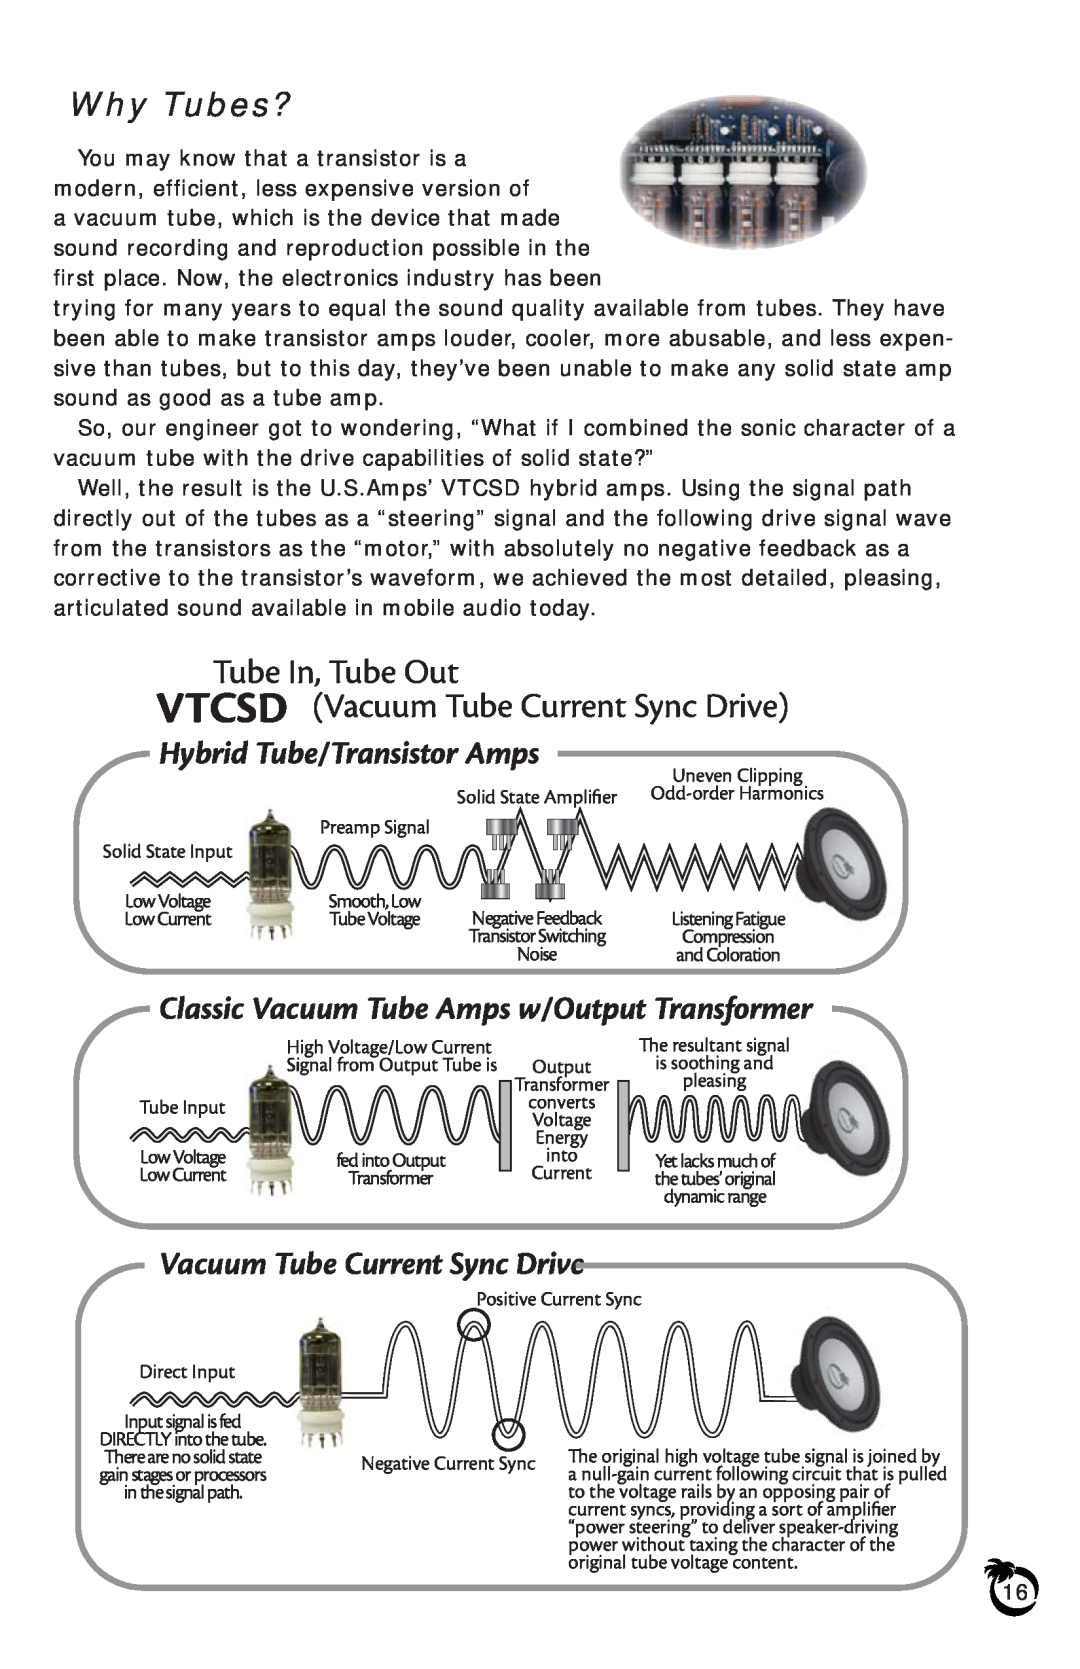 US Amps AX owner manual Why Tubes?, Tube In, Tube Out VTCSD Vacuum Tube Current Sync Drive, Hybrid Tube/Transistor Amps 